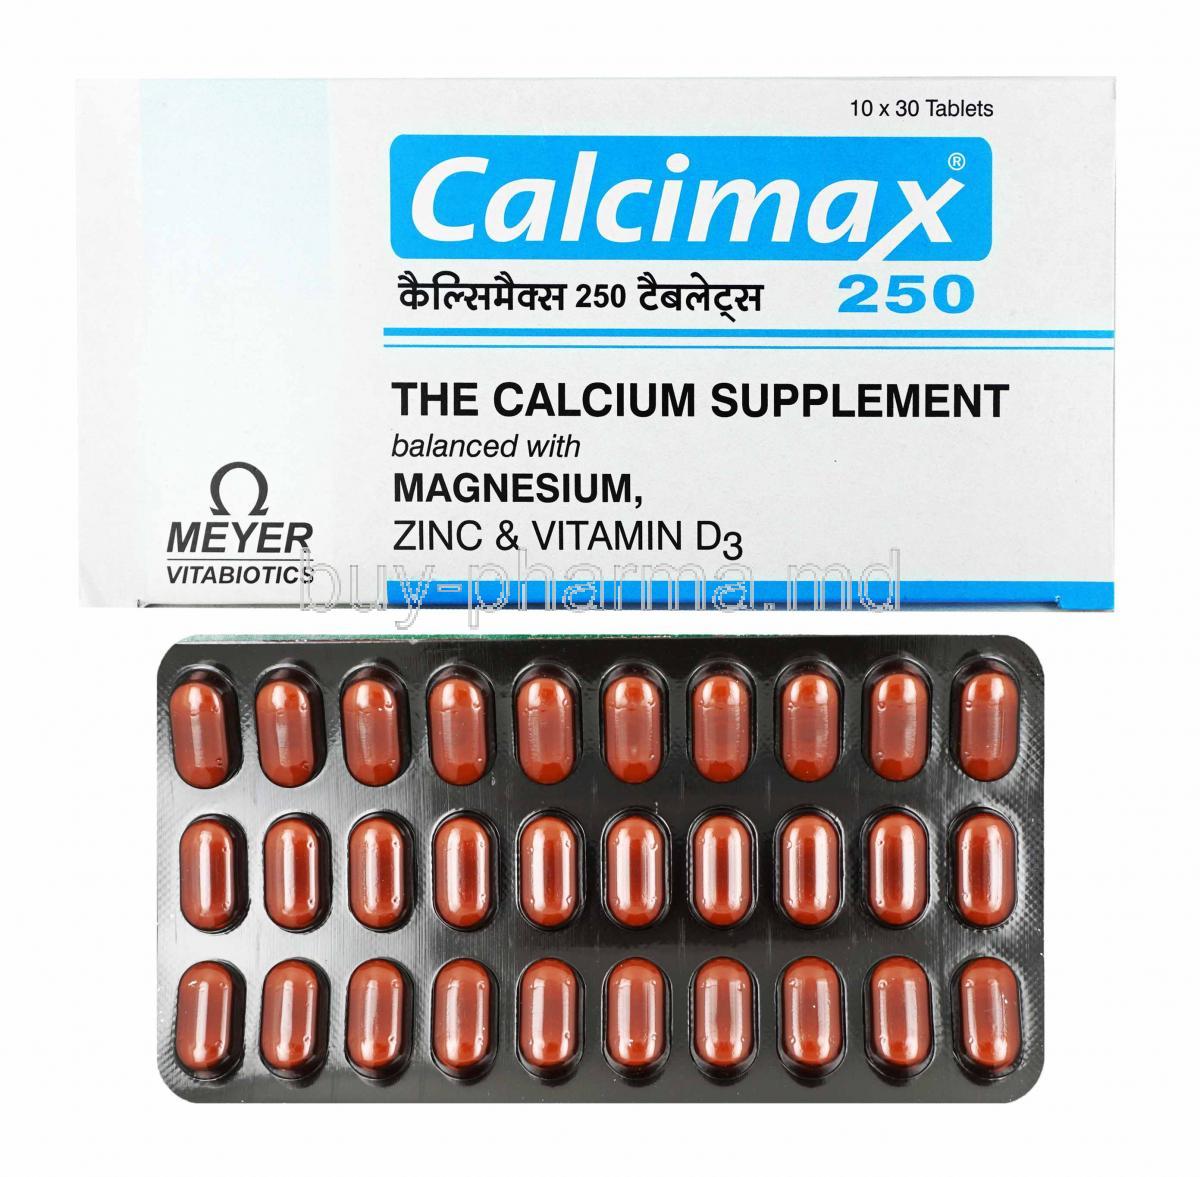 Calcimax box and tablets